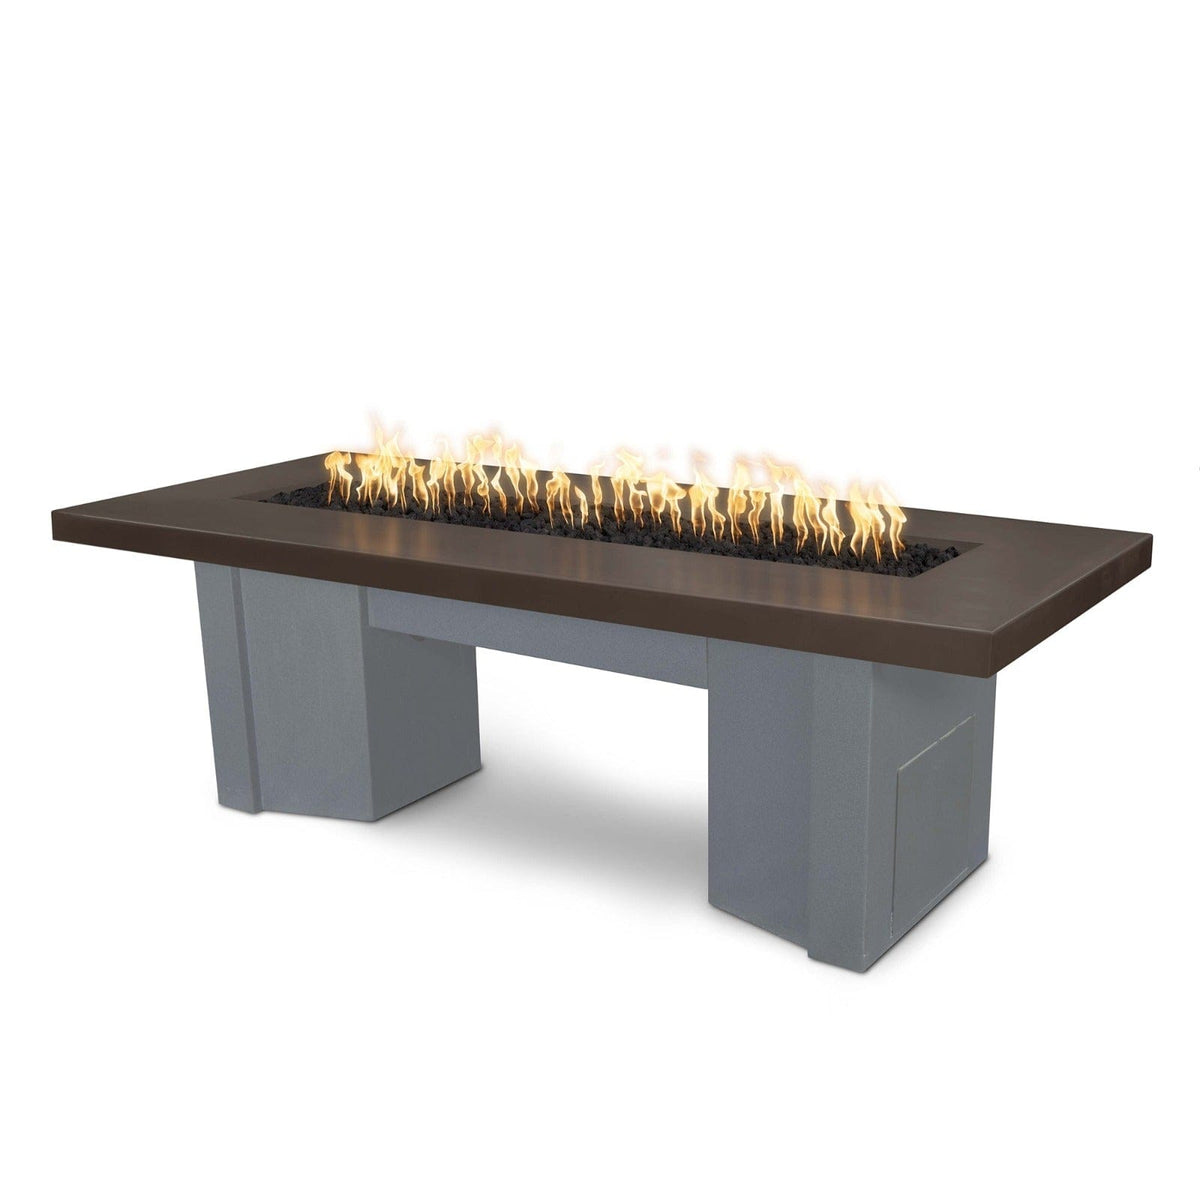 The Outdoor Plus Fire Features Chocolate (-CHC) / Gray Powder Coated Steel (-GRY) The Outdoor Plus 78&quot; Alameda Fire Table Smooth Concrete in Liquid Propane - Match Lit with Flame Sense System / OPT-ALMGFRC78FSML-LP